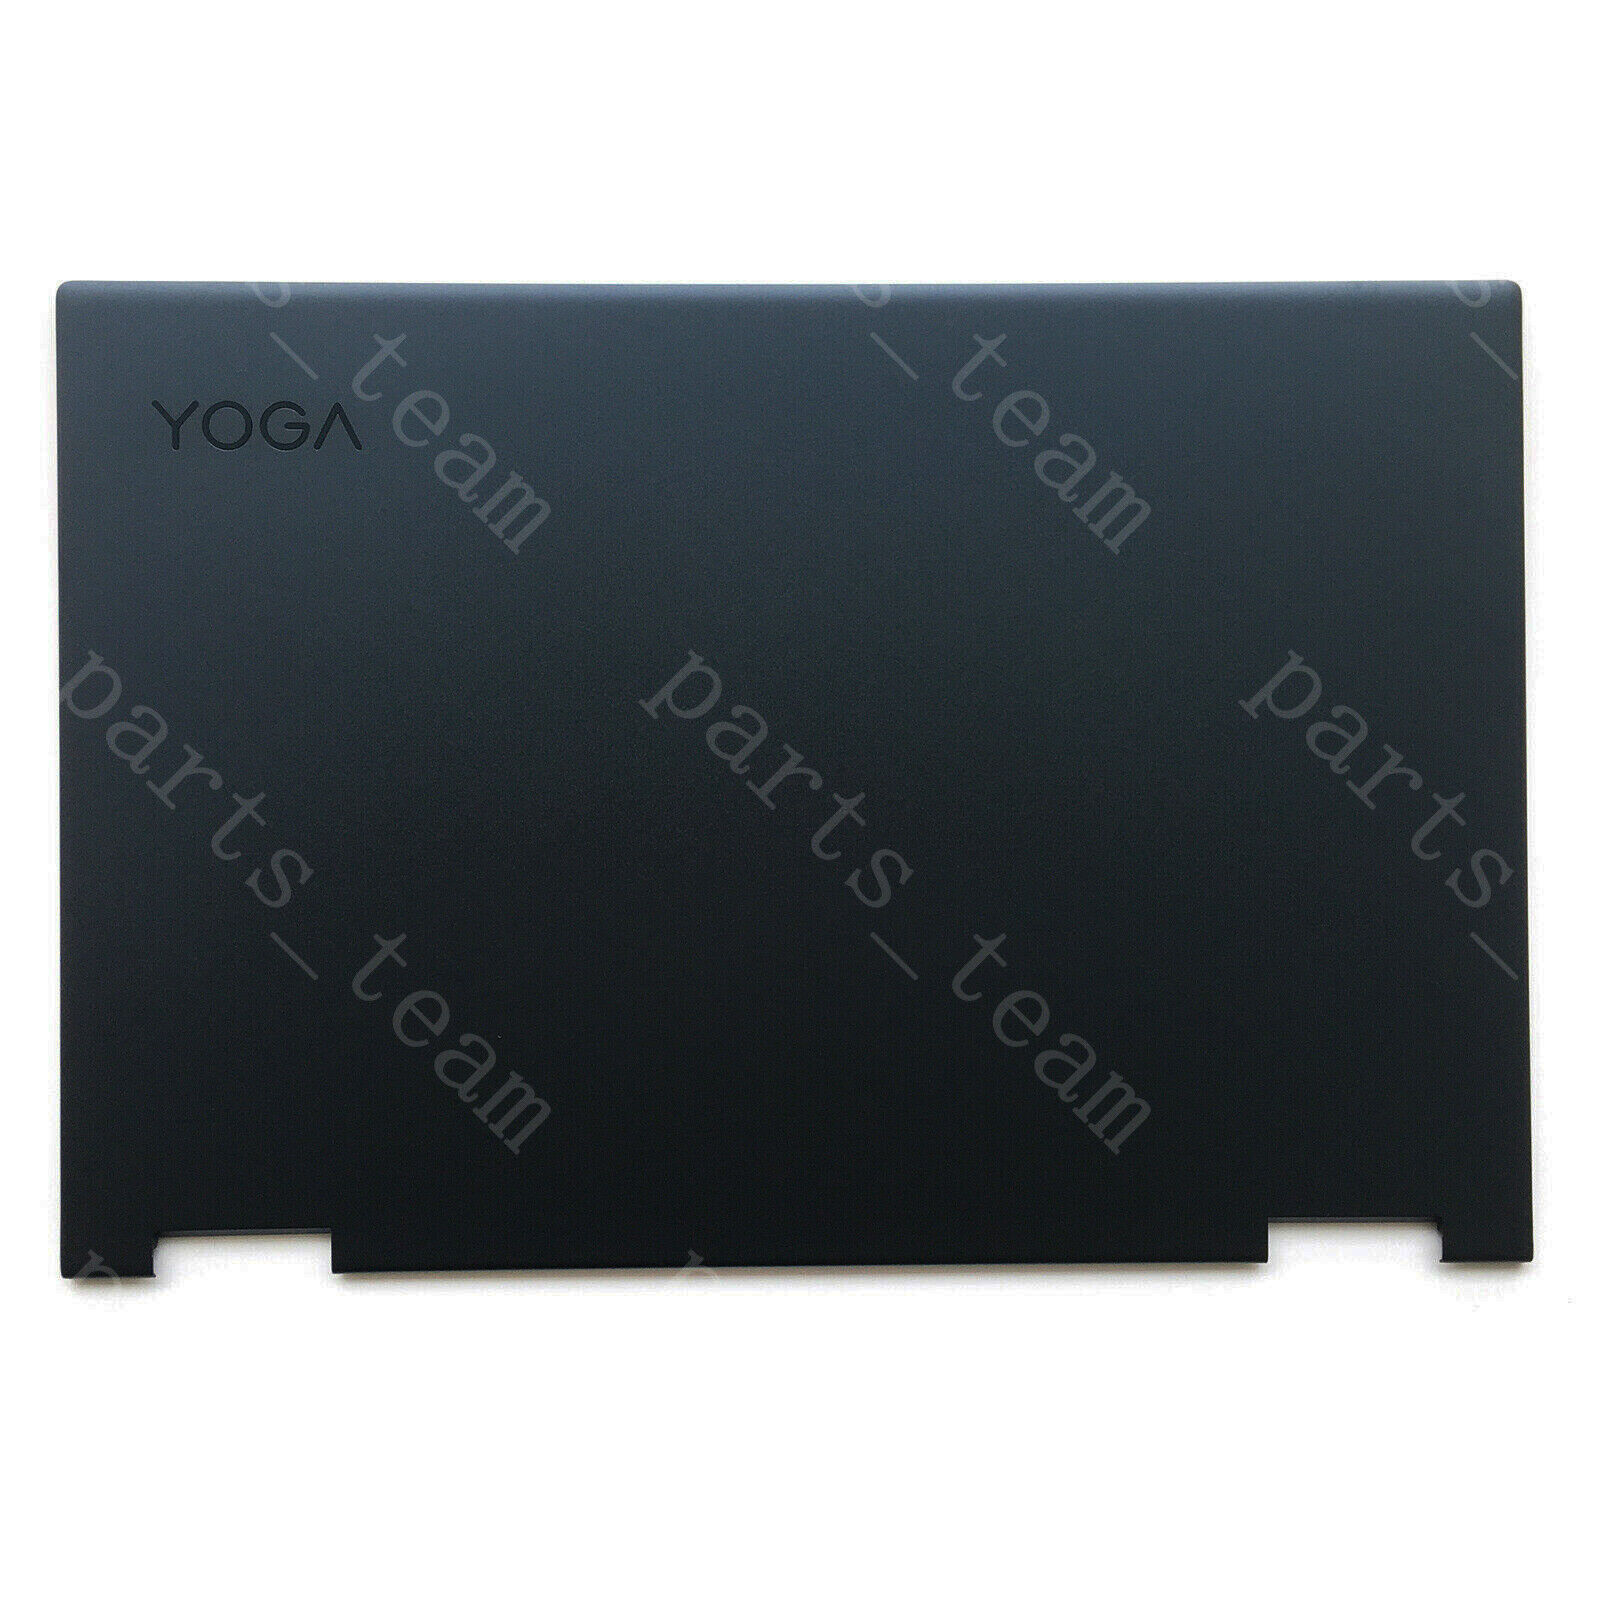 New For Lenovo Yoga 730-15 81CU 730-15IKB 15IWL LCD Back Cover Lid AM27G000E20